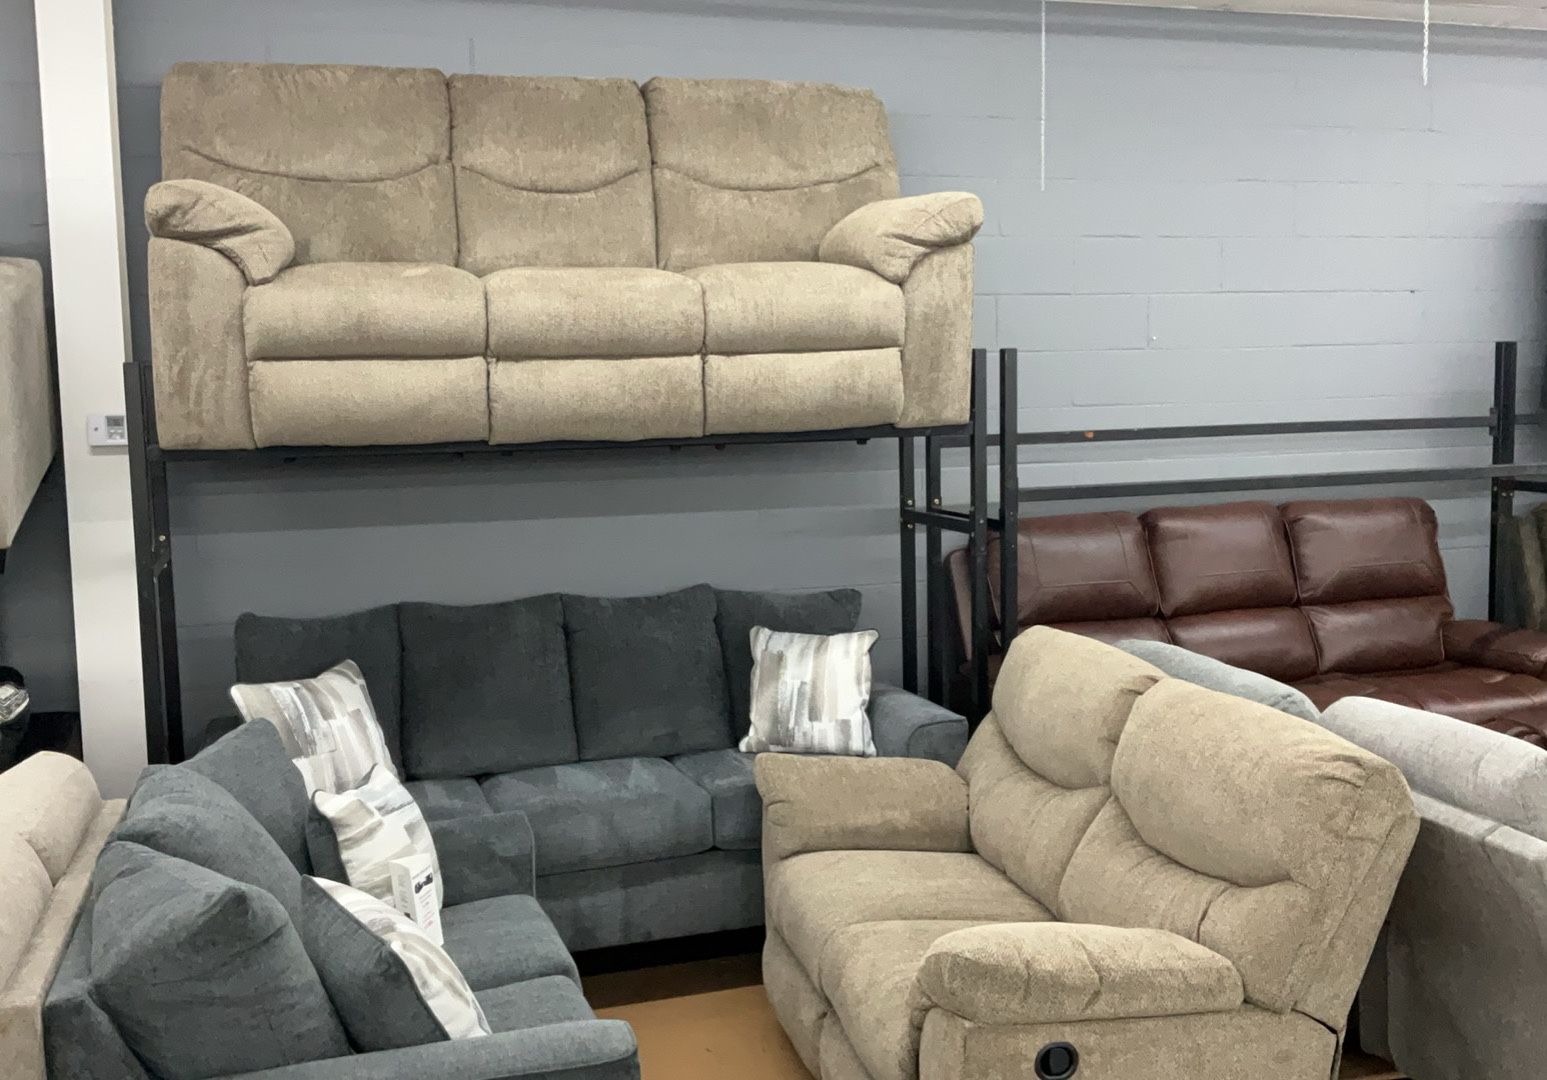 🔥Recliners Sofa & Loveseat 2 Recliners On each Couch.